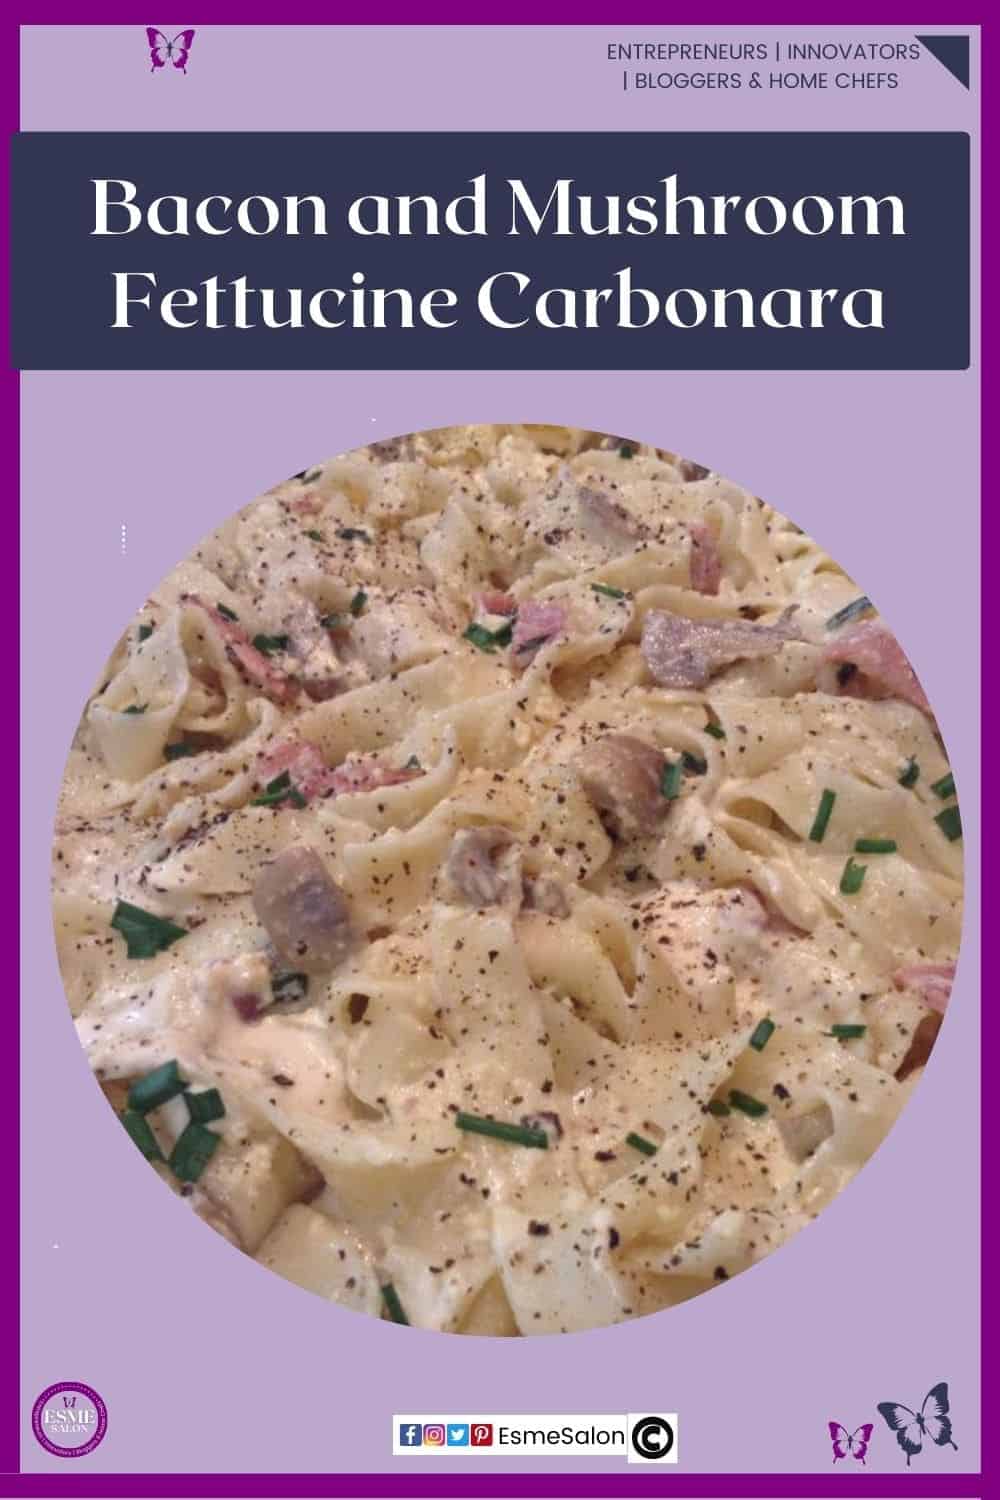 an image of a dish filled with creamy Bacon and Mushroom Fettucine Carbonara